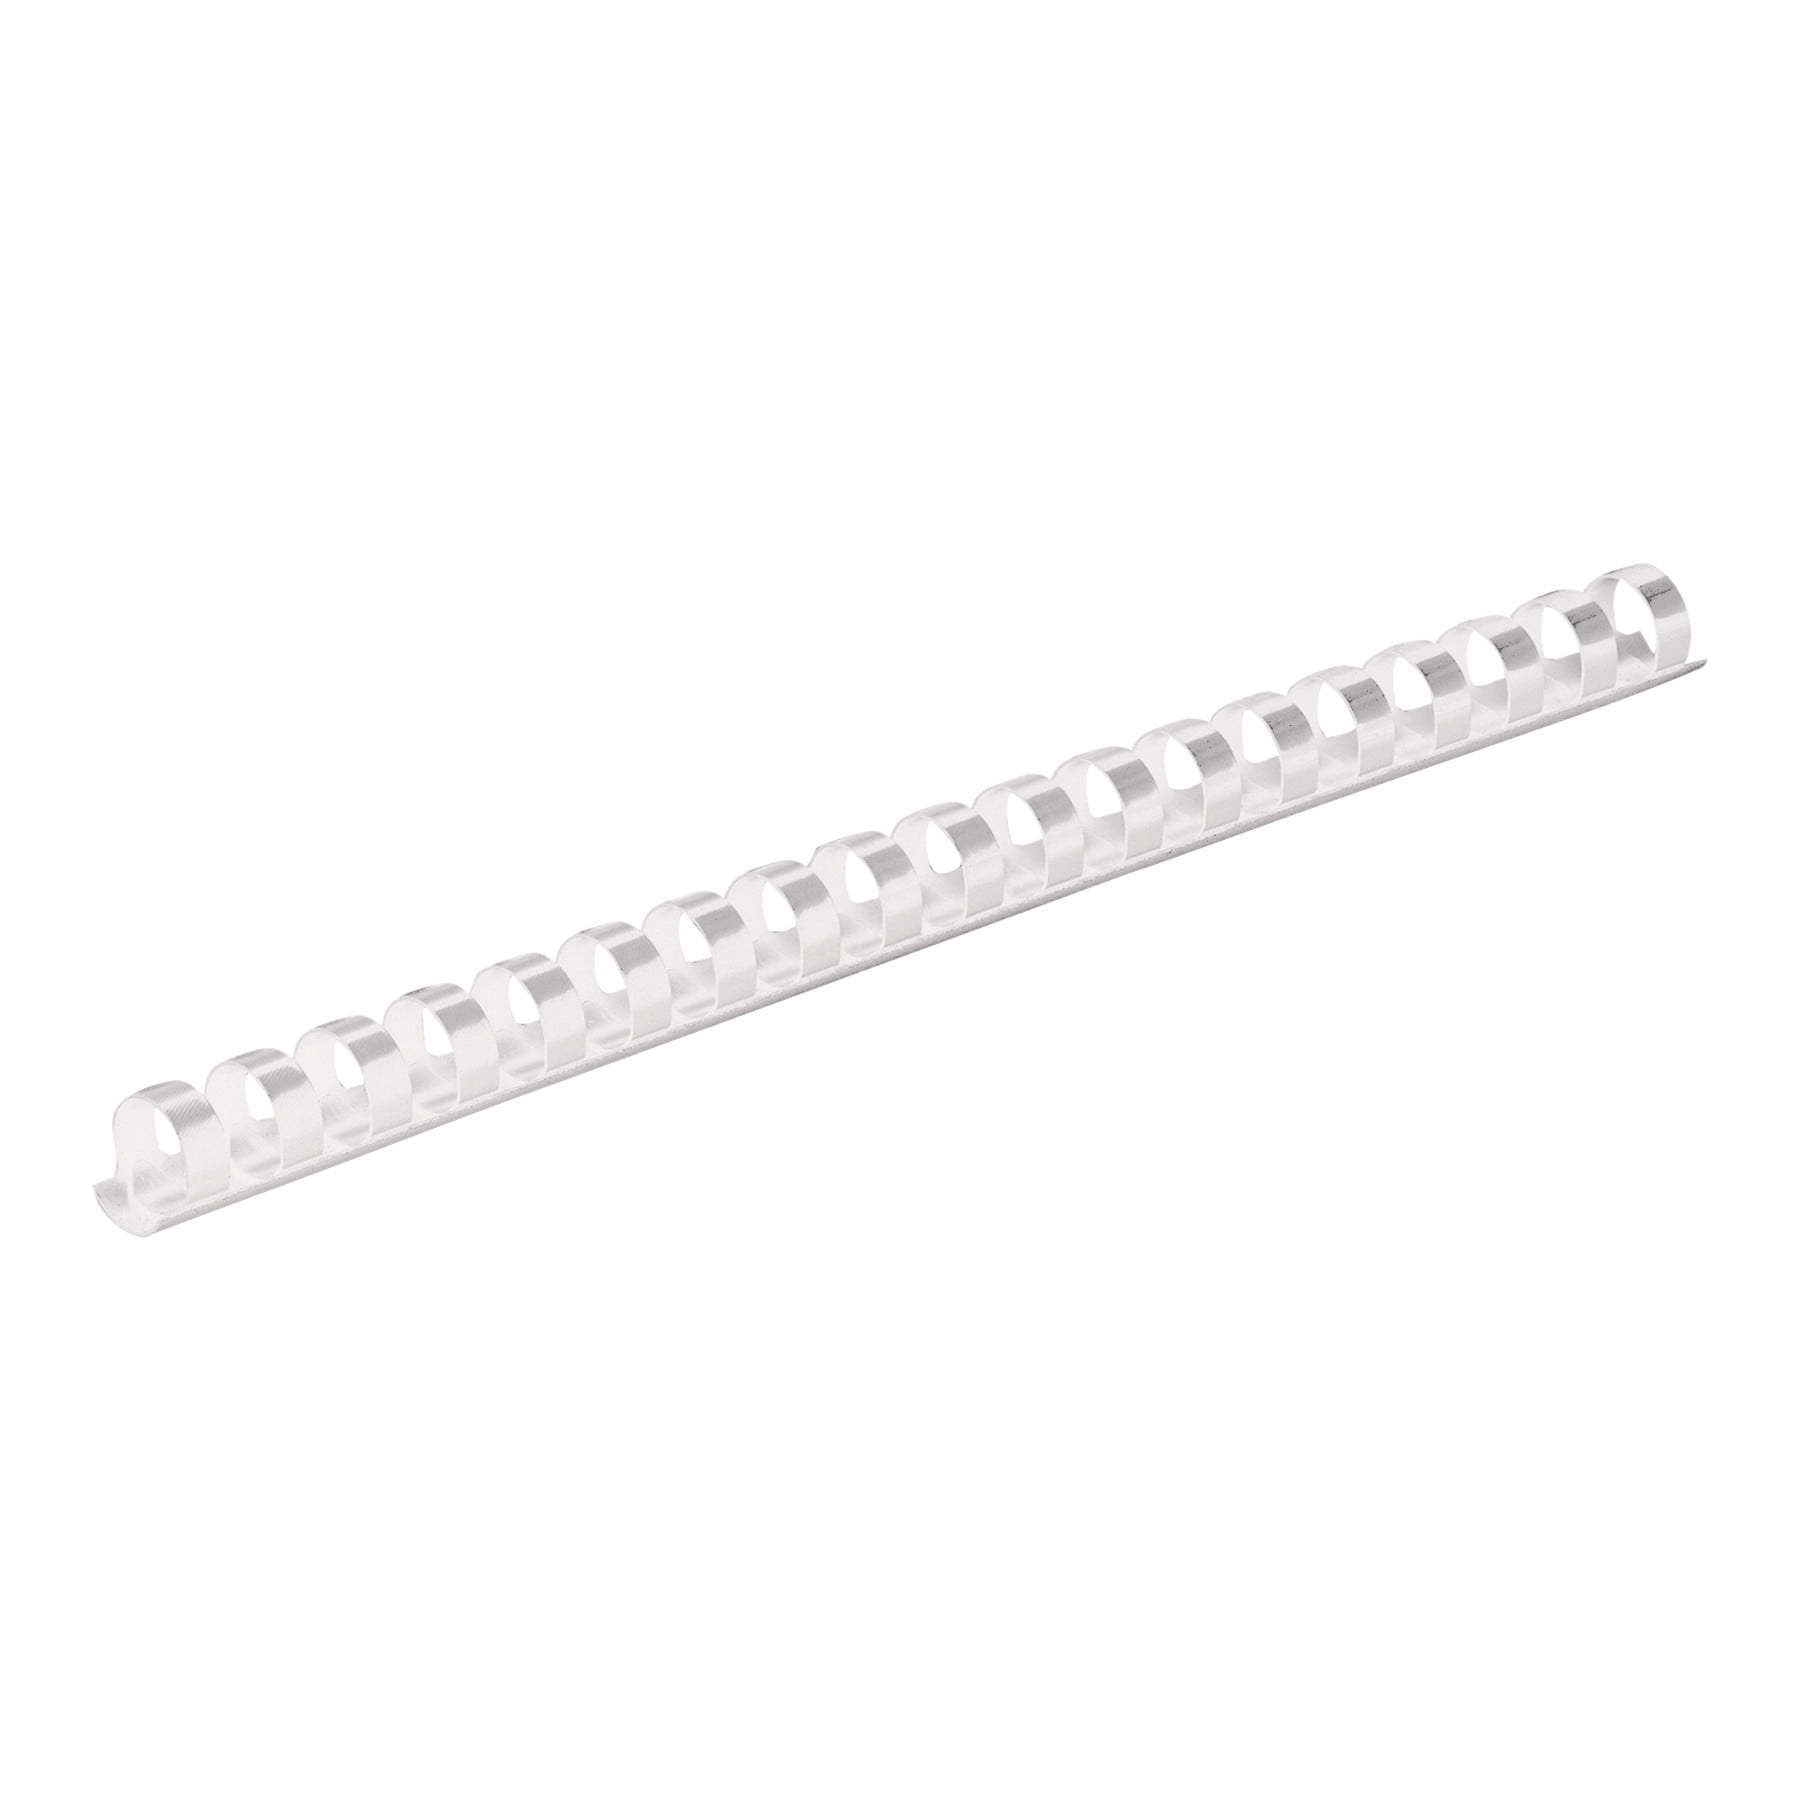 3/8 Inch Diameter 100 P White Fellowes Plastic Comb Binding Spines 55 Sheets